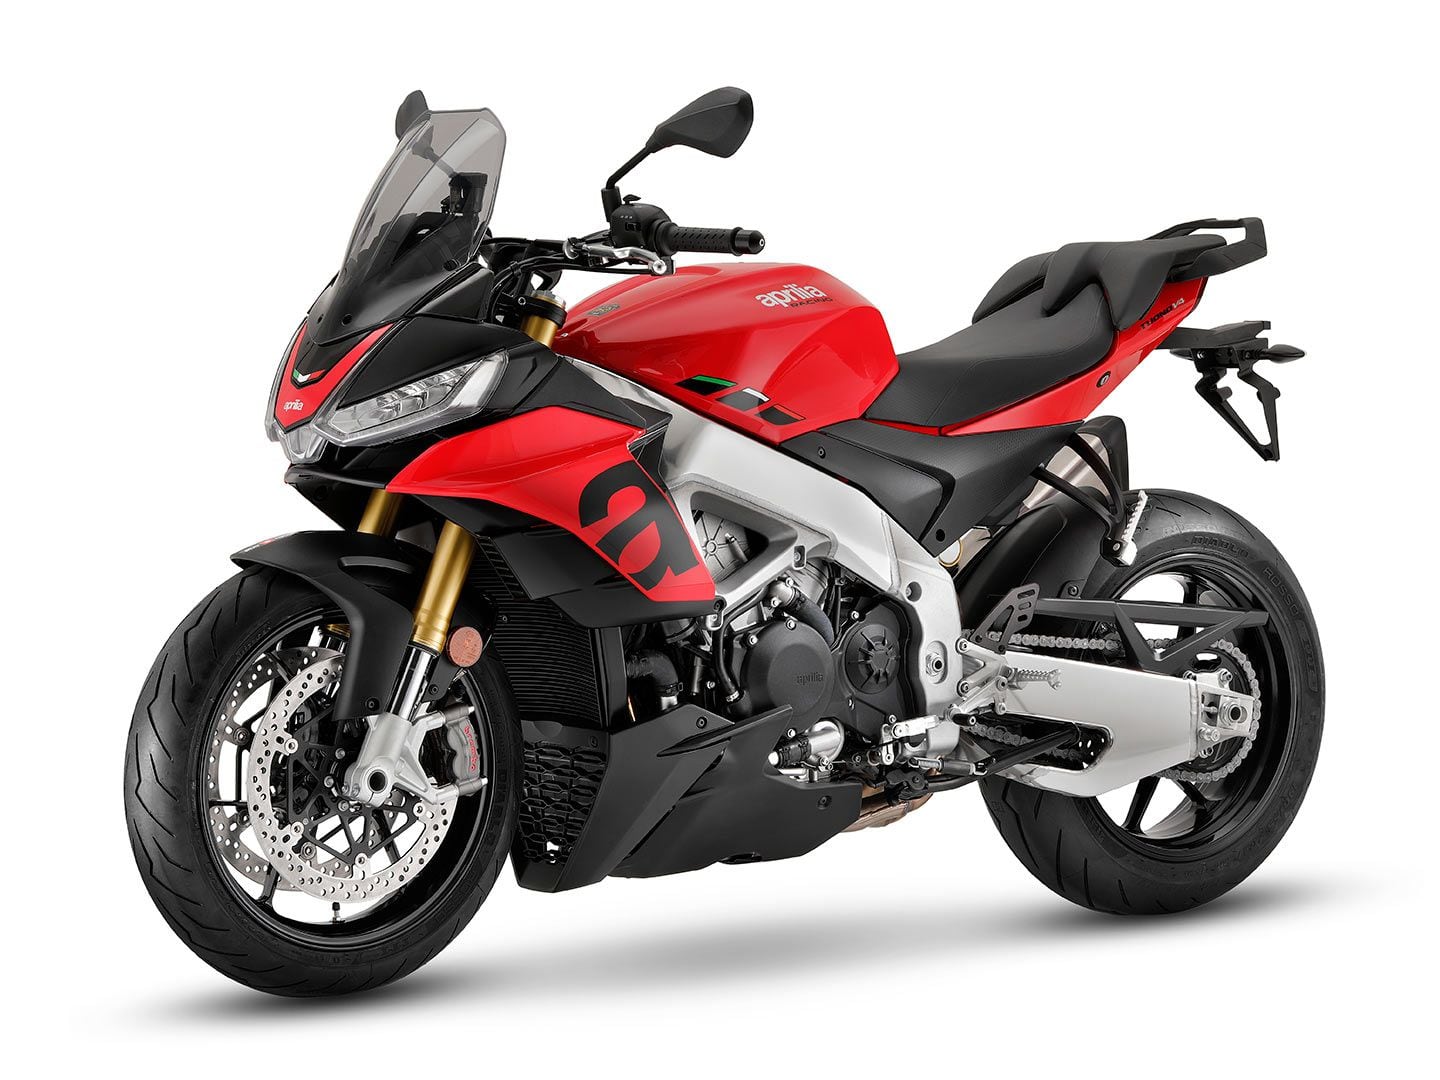 Tuono V4 components are derived from the RSV4 but the base model targets the sport-touring segment with a more upright riding position and tall windscreen.